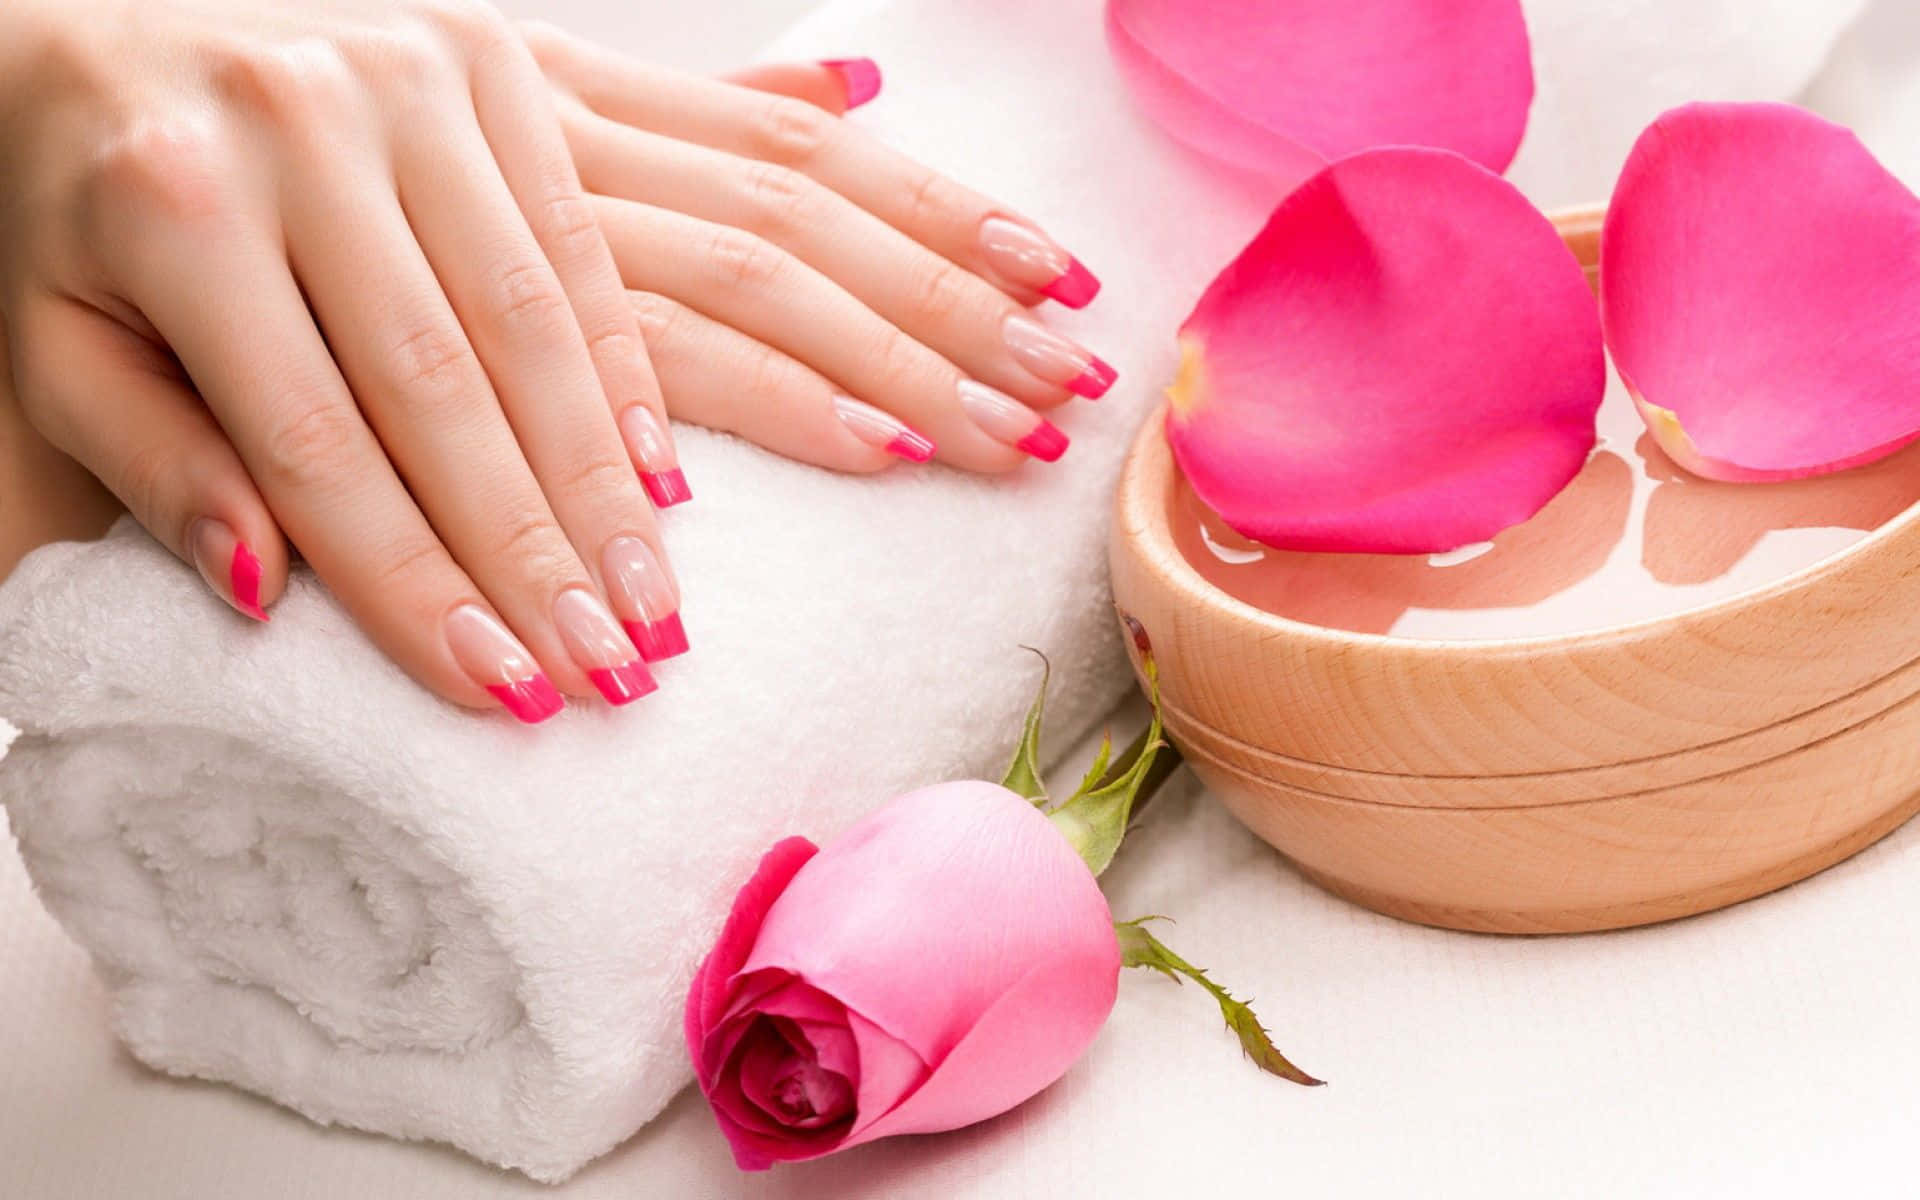 A Woman With Pink Nails And Roses On A Towel